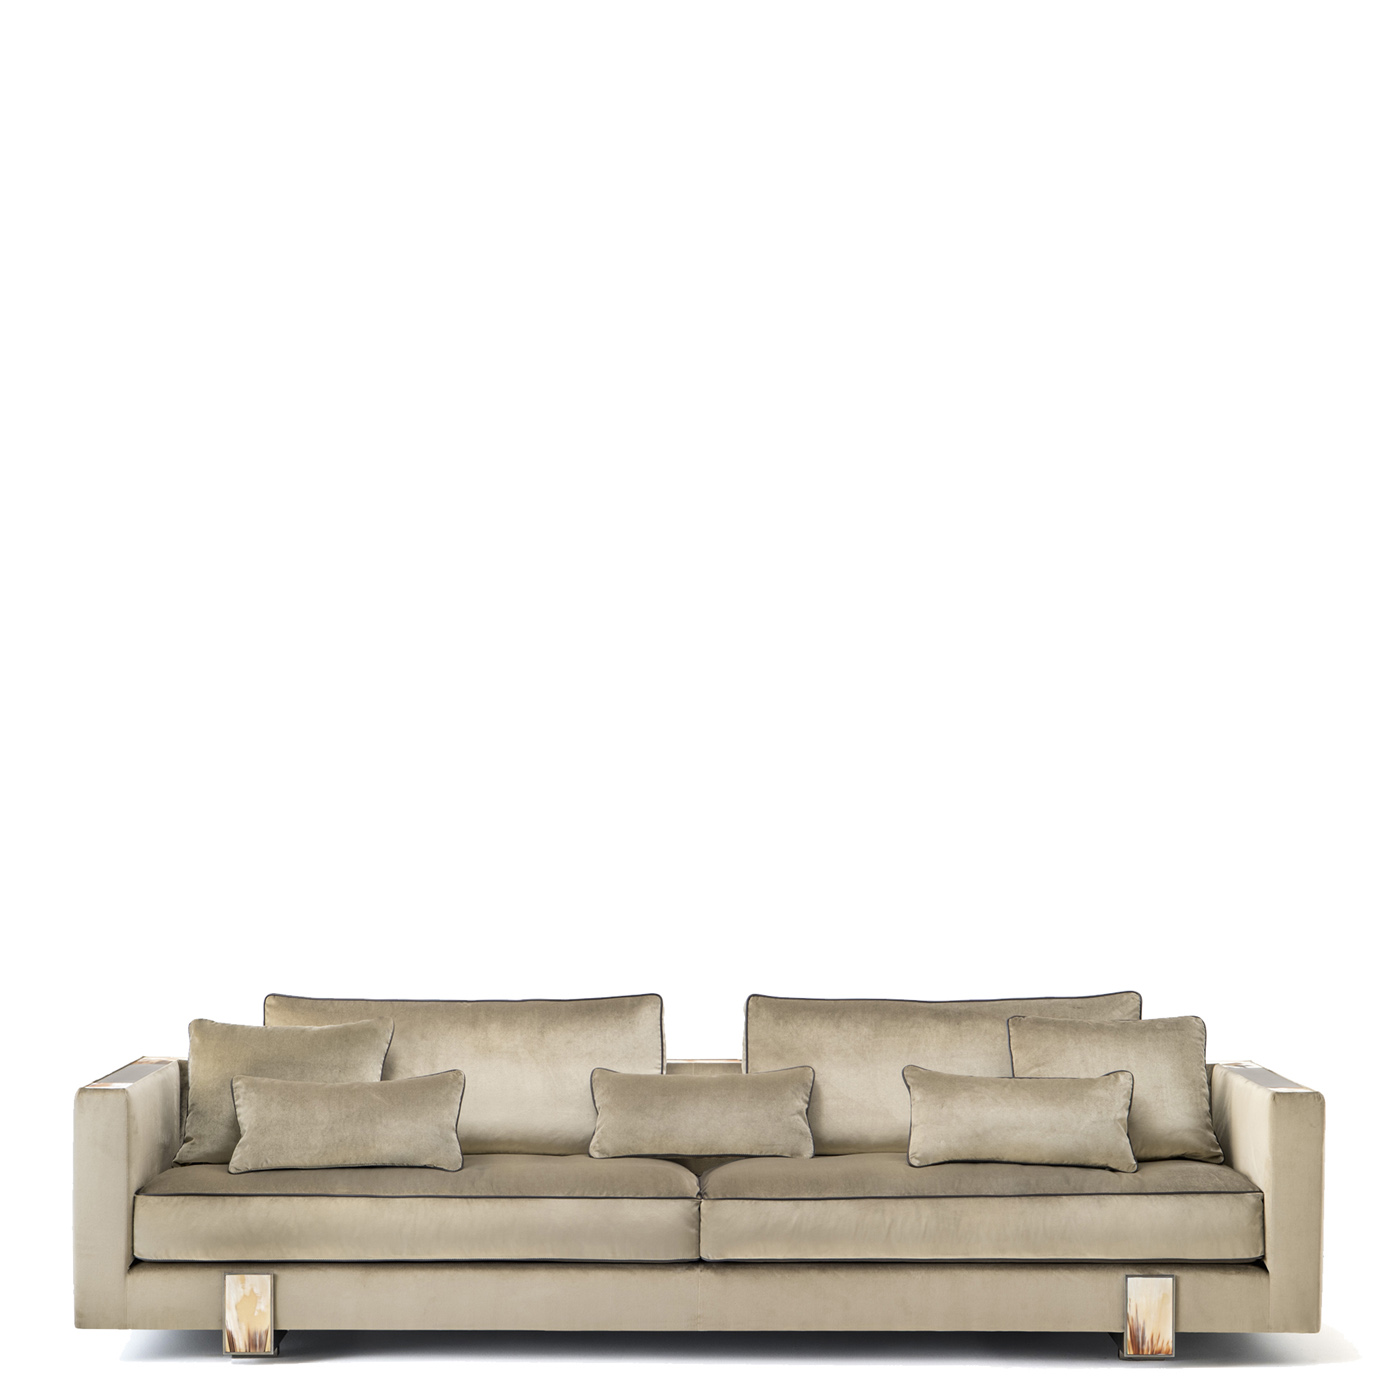 Sofas and seats - Adriano sofa in Lario velvet with horn details mod. 6035D - Arcahorn